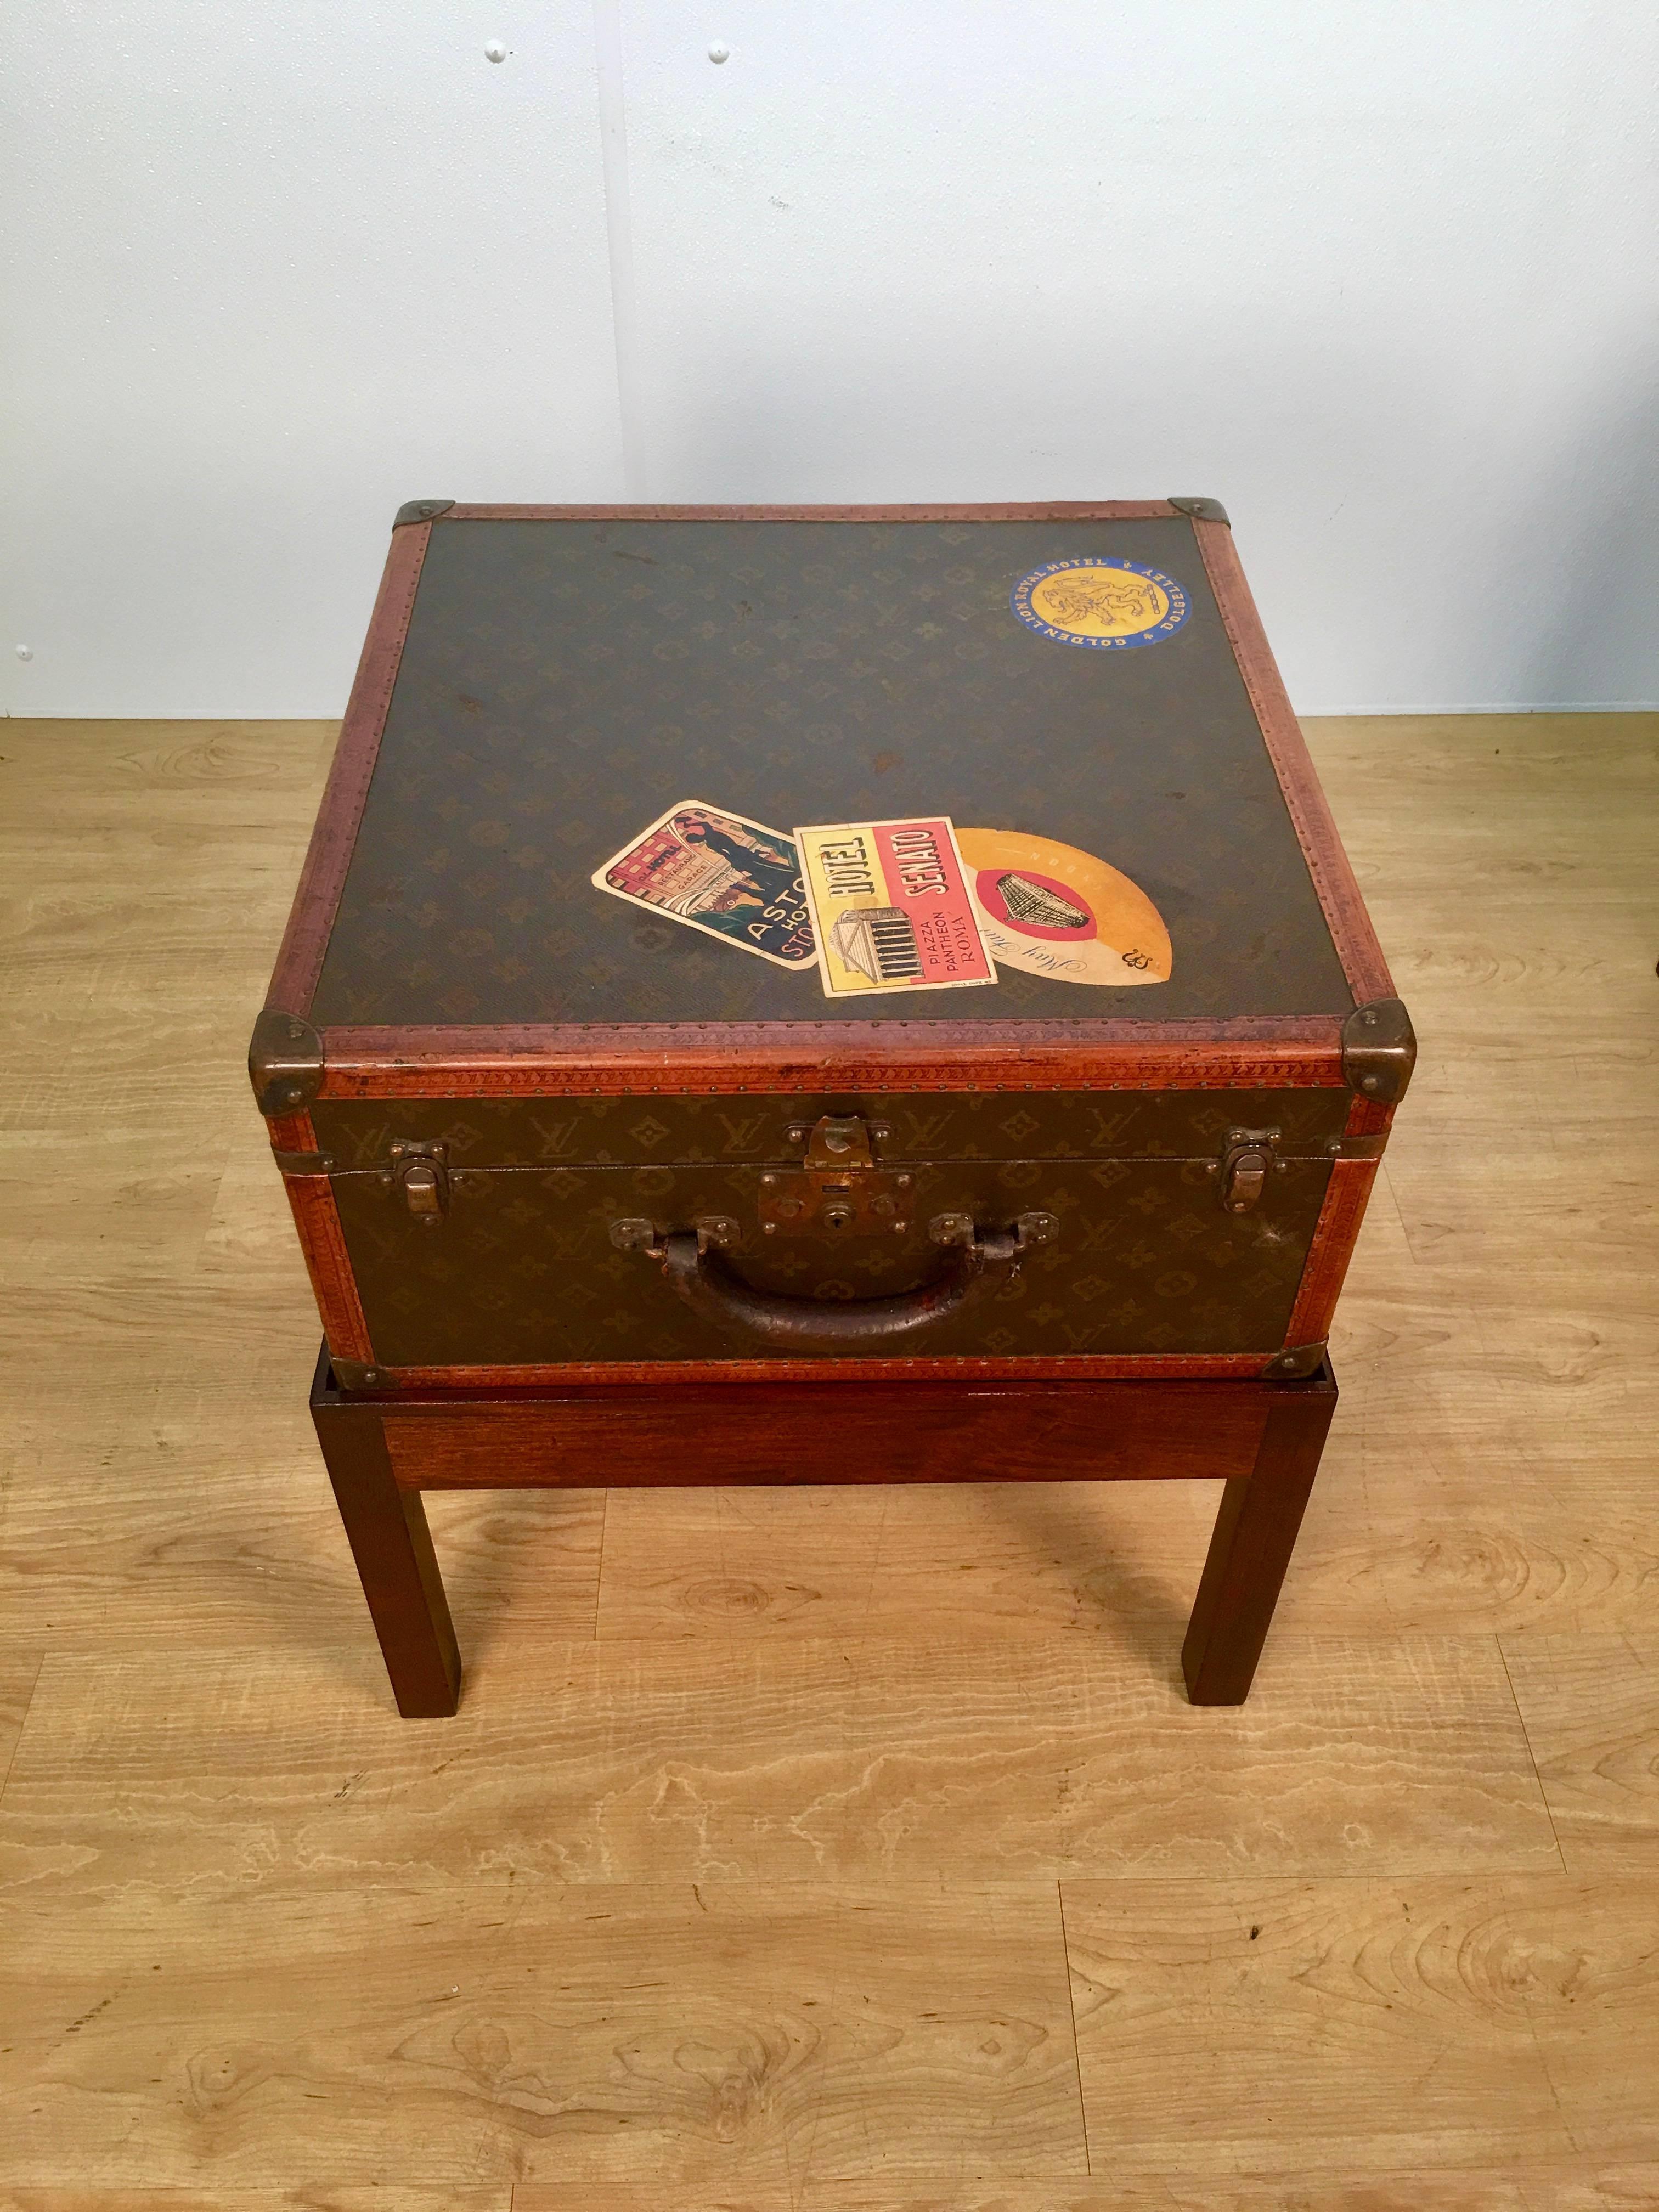 Louis Vuitton steamer trunk on stand, unusual square shape.
The 20.25" square hard case with numerous vintage travel labels and monogram of "K.D.P New York" raised on a custom mahogany stand. 
If desired we can have our conservator